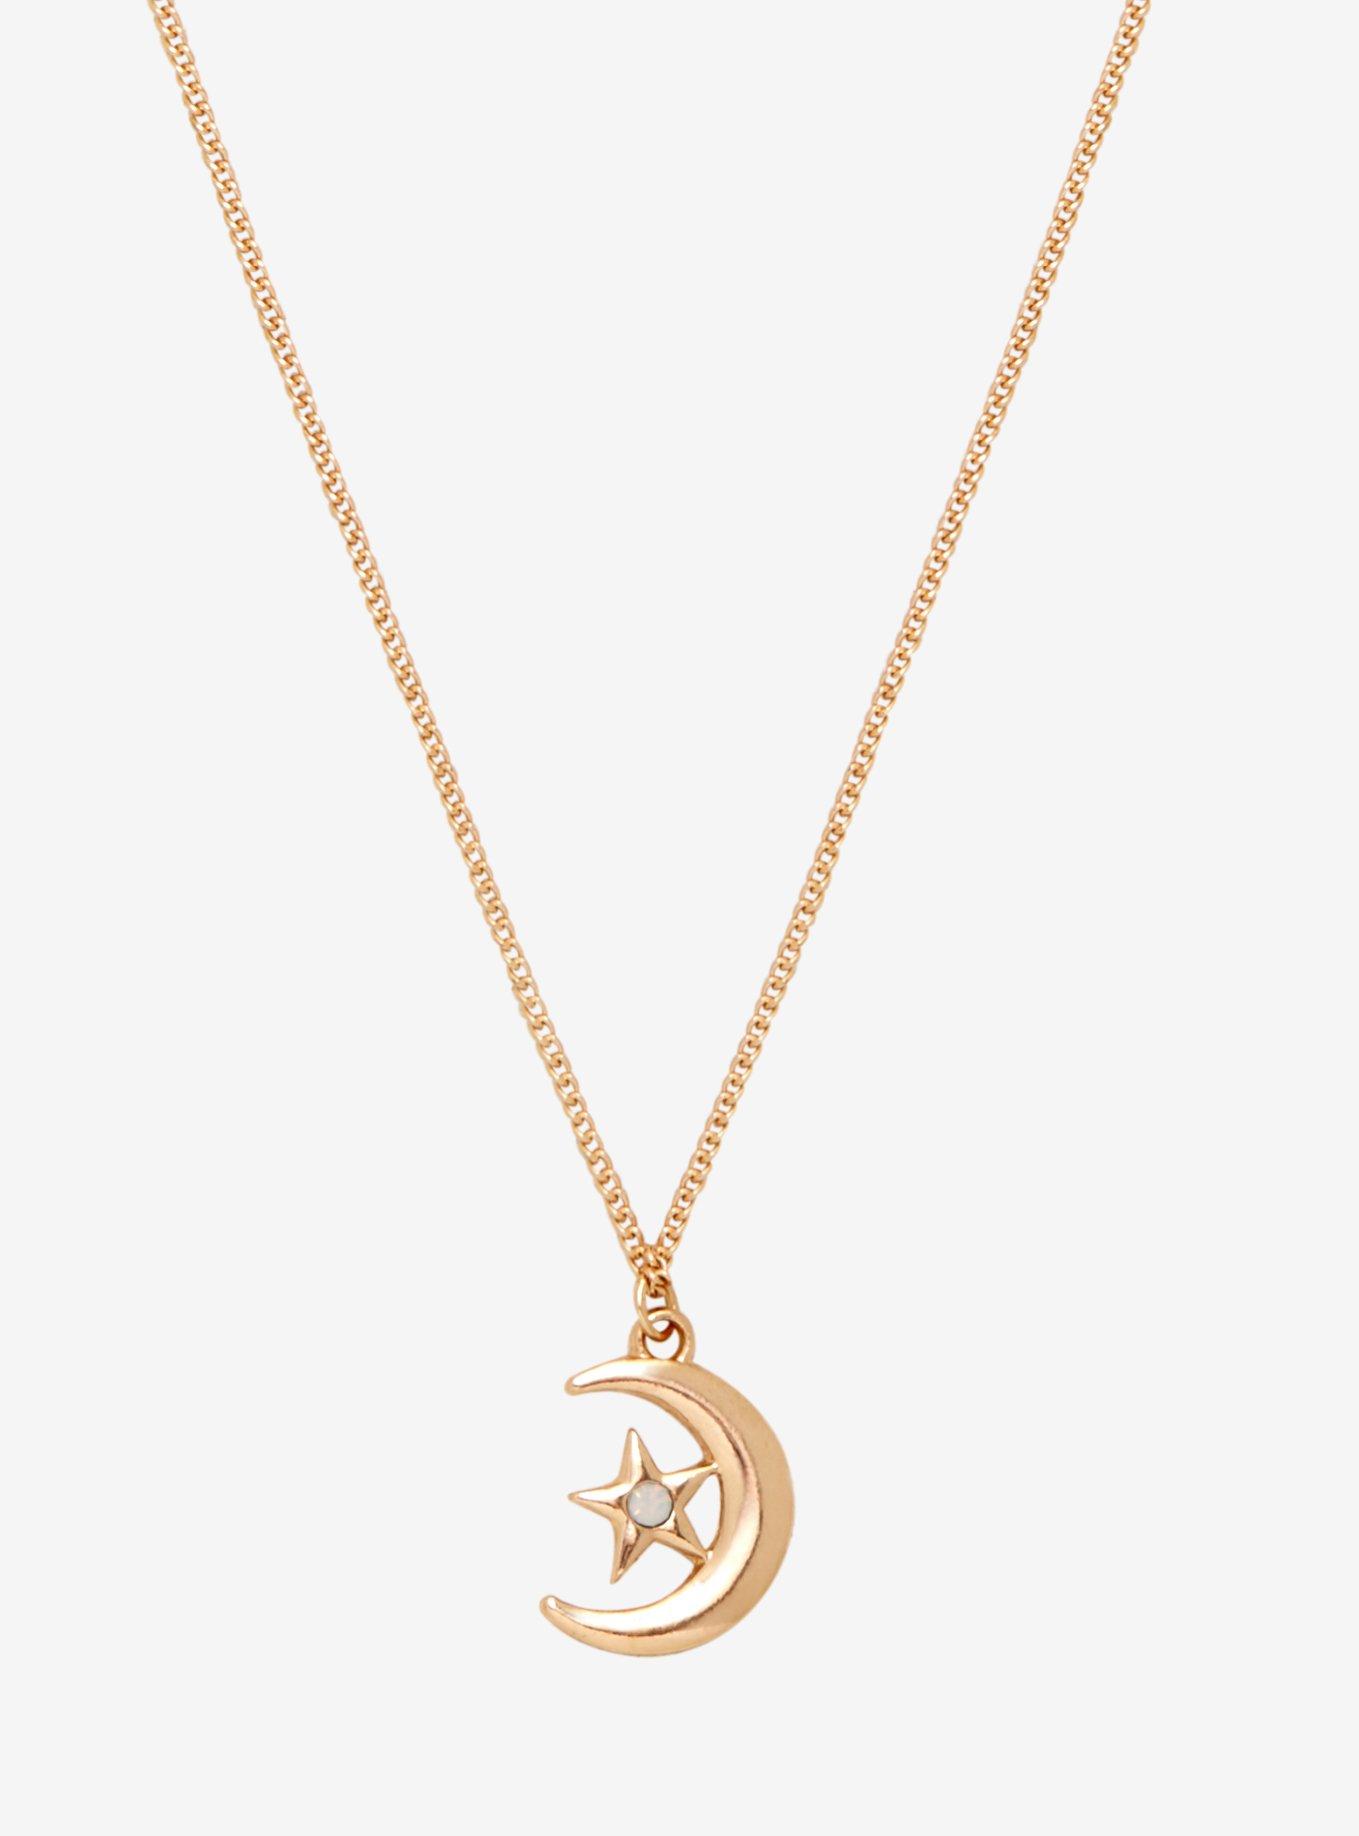 Light Up My Life Crescent Moon Star Necklace, , hi-res